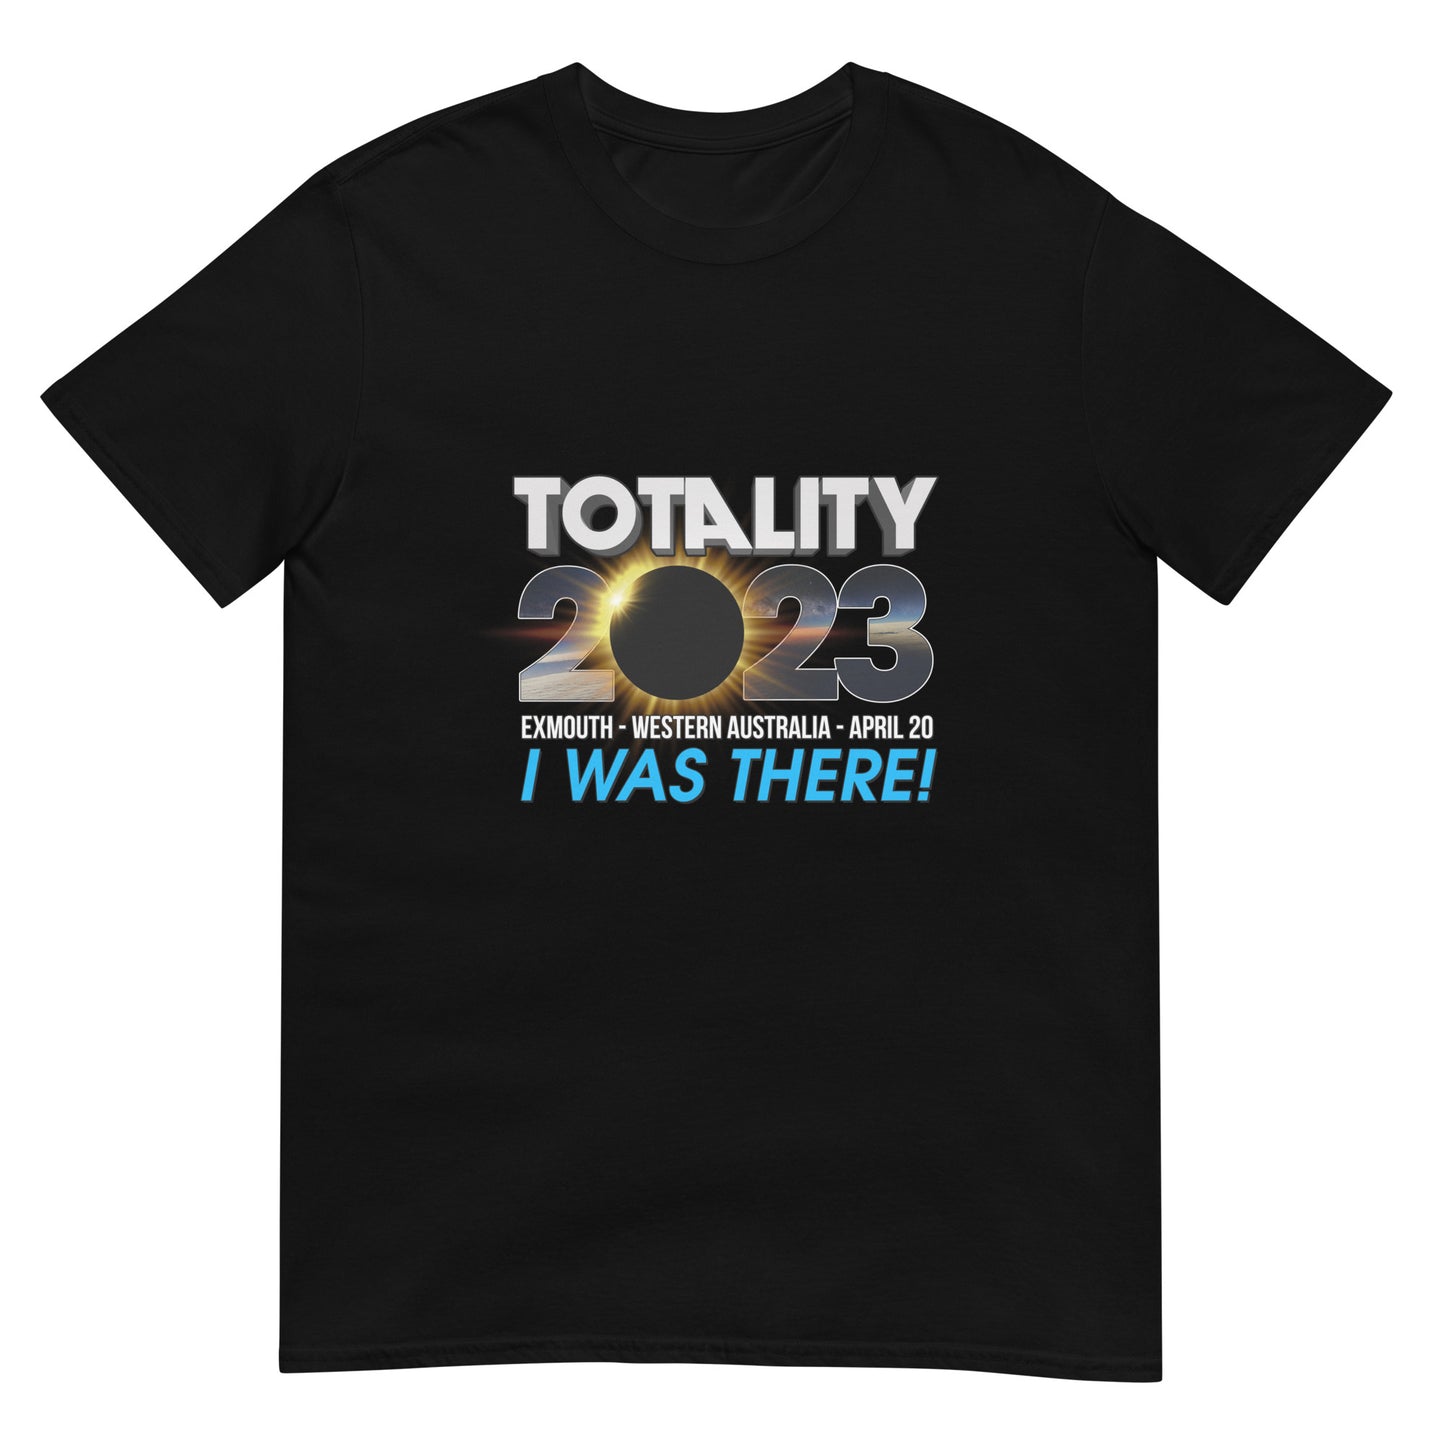 TOTALITY 2023 - I Was There!